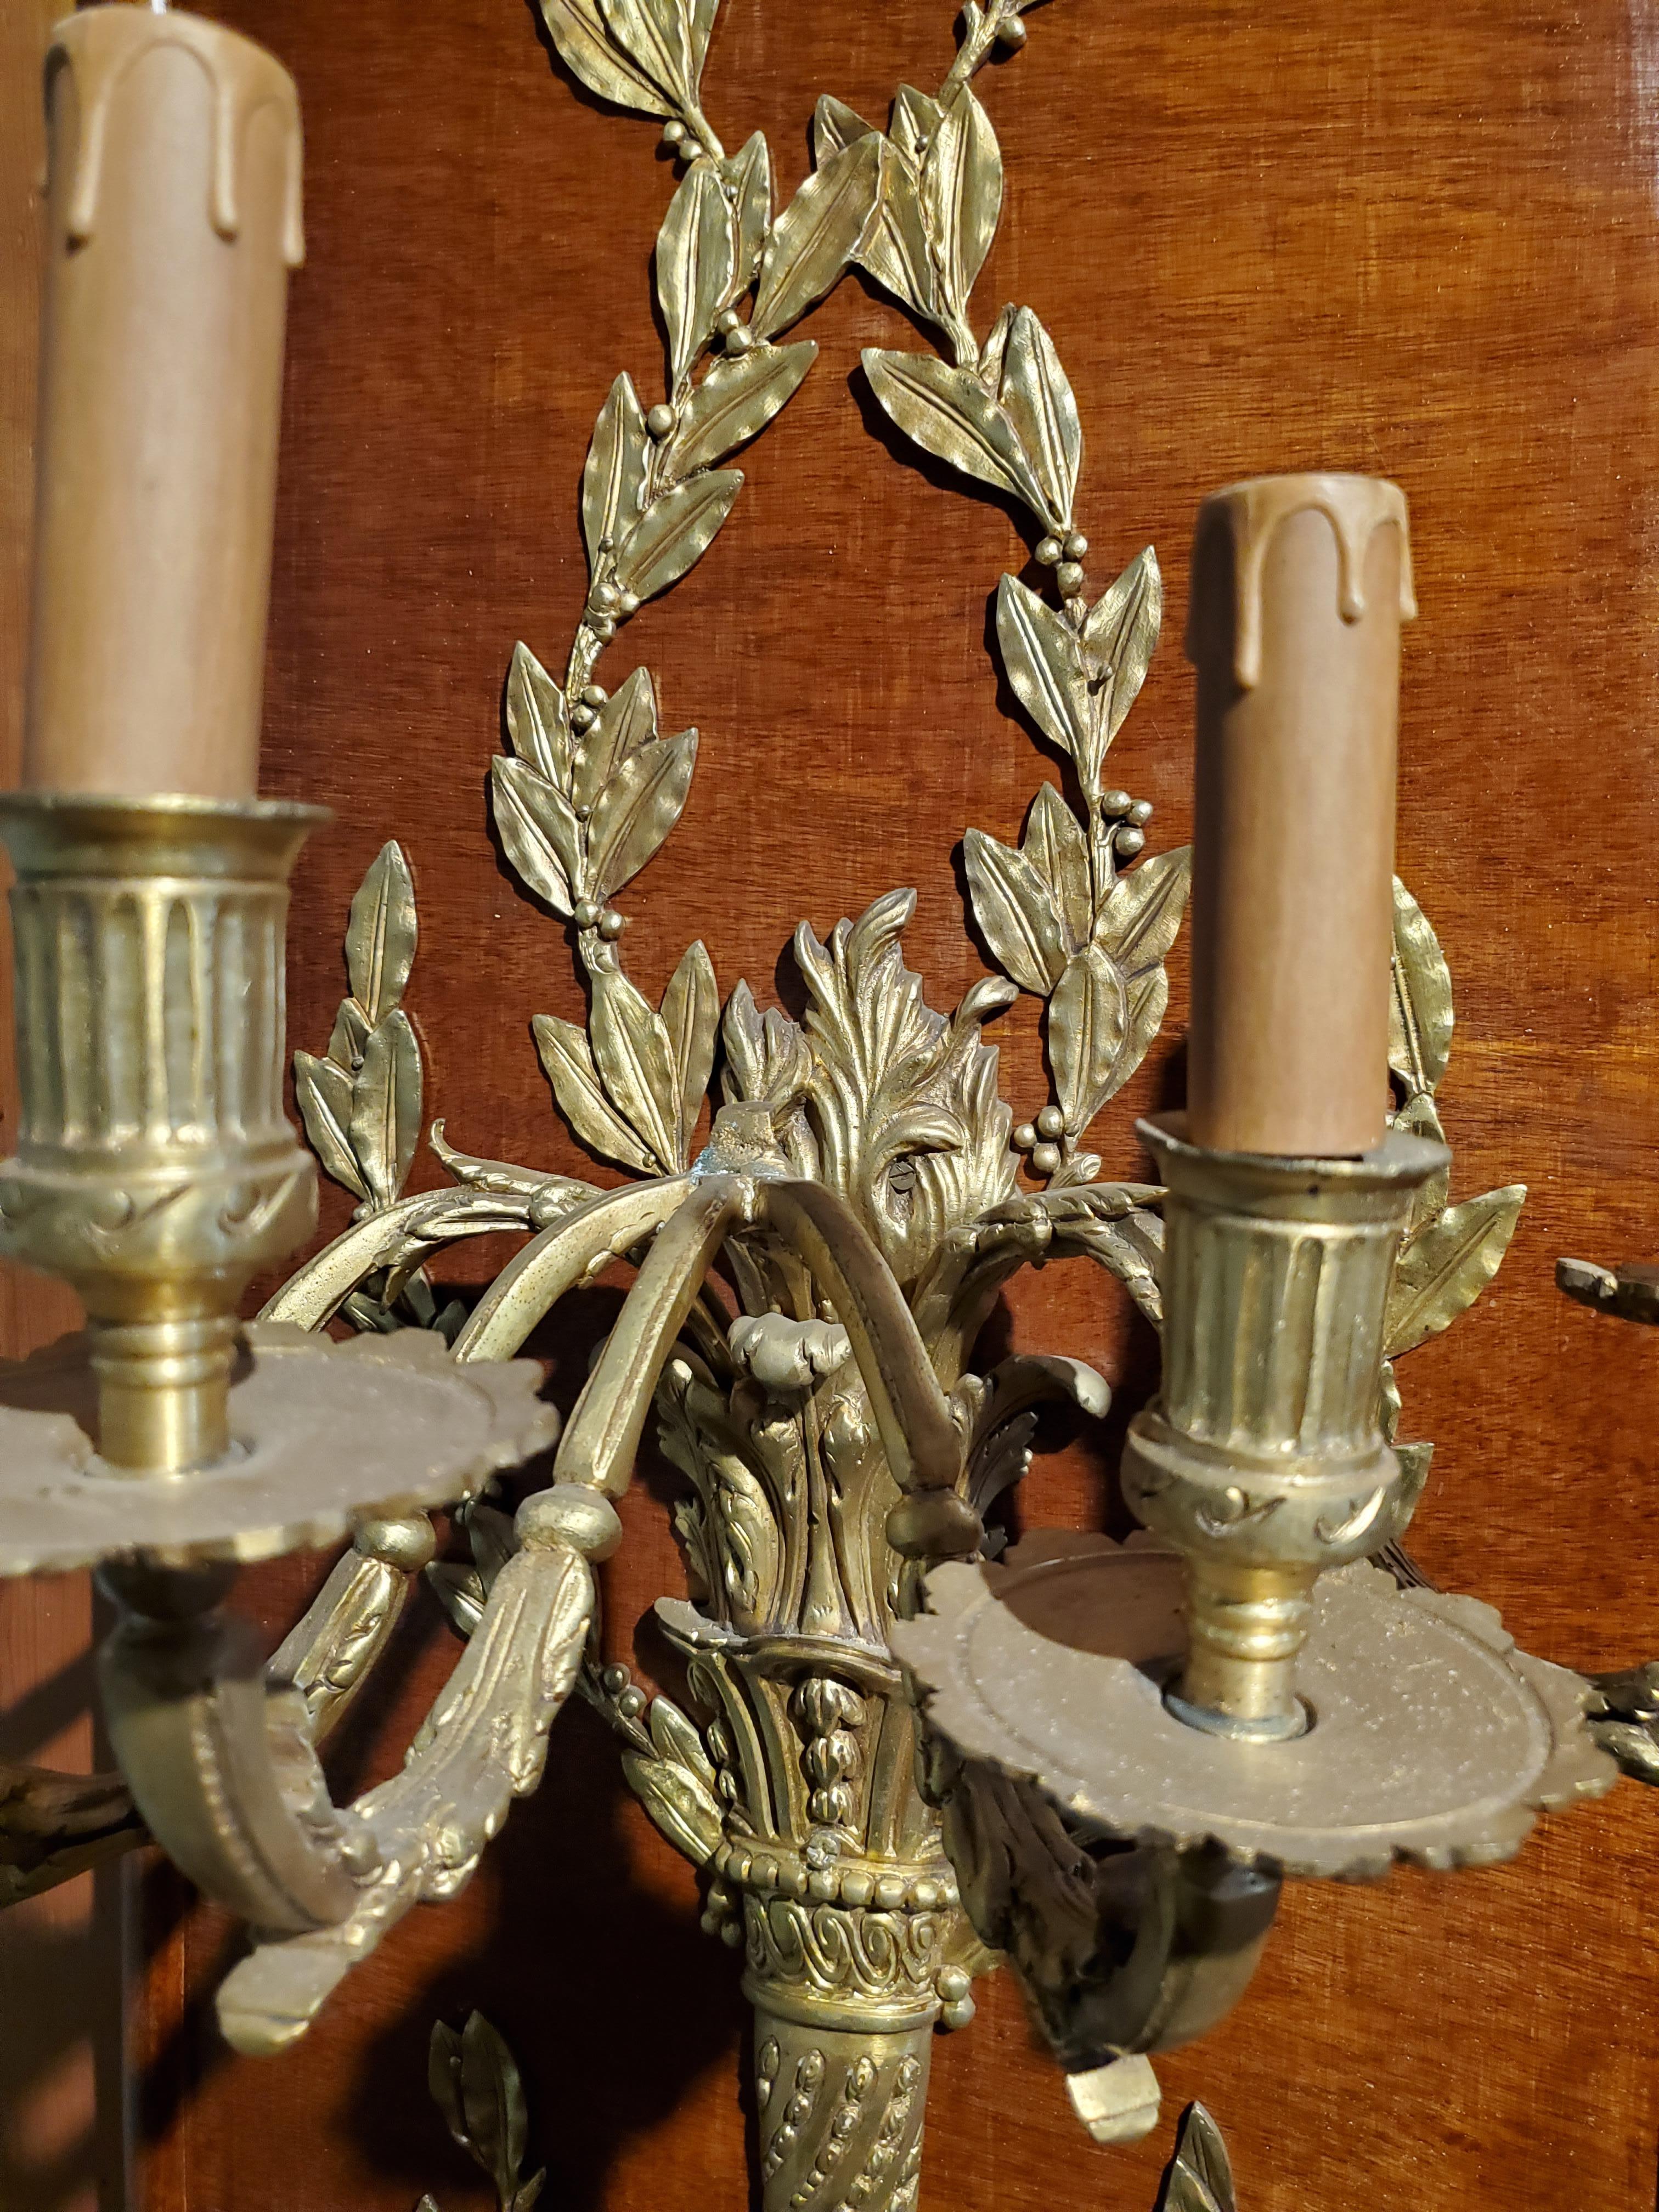 Pair of Antique French Wood Paneled Bronze D'ore Wall Sconces In Good Condition For Sale In New Orleans, LA